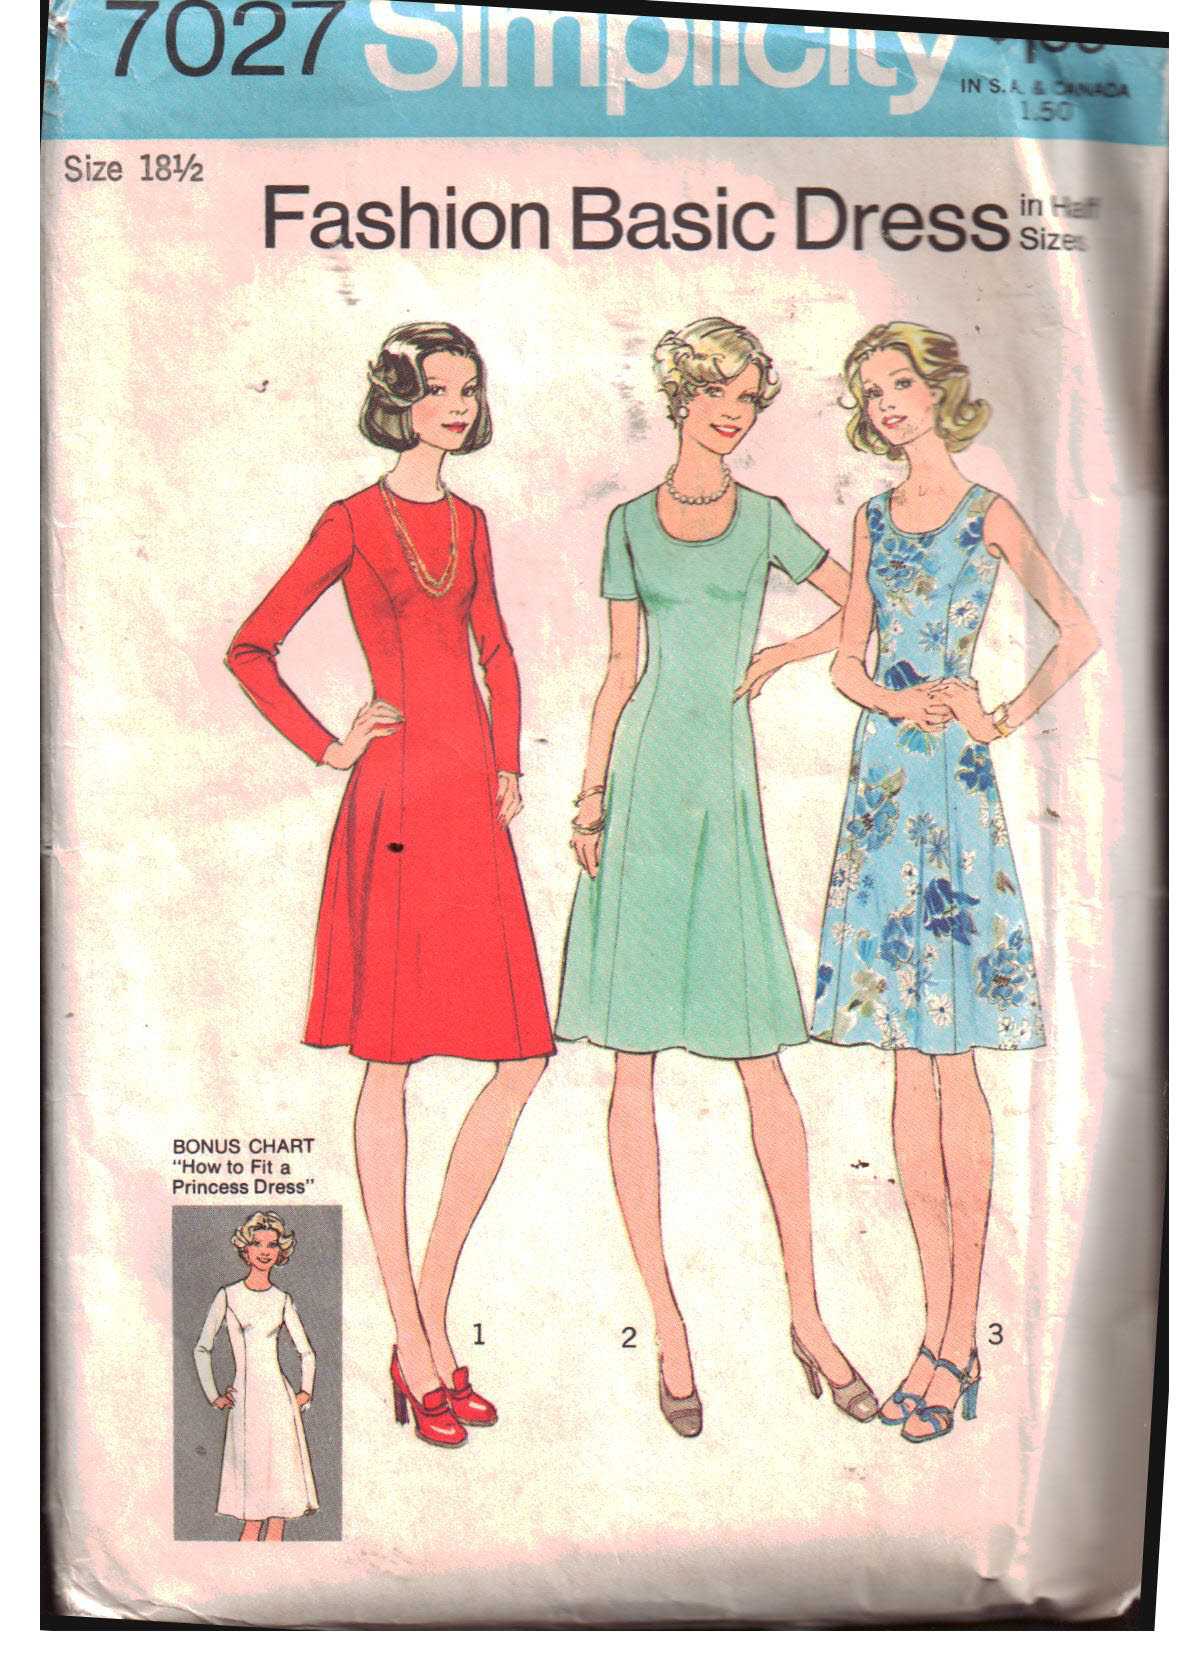 Simplicity 7027 Dress Size: 18.5 Used Sewing Pattern